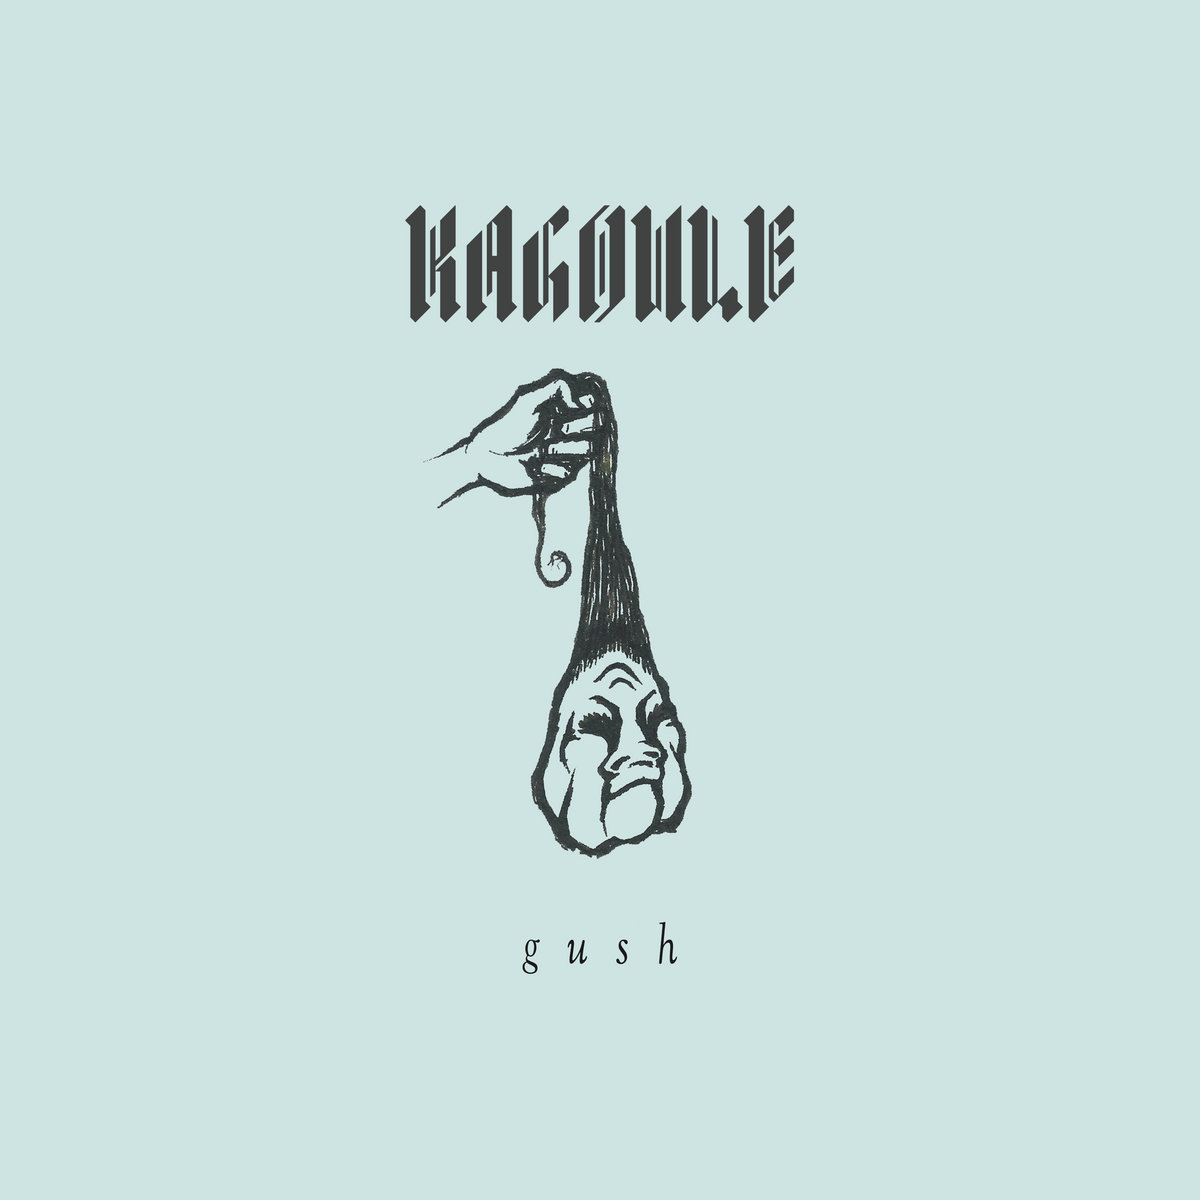 TRACK OF THE DAY: “Gush” by Kagoule